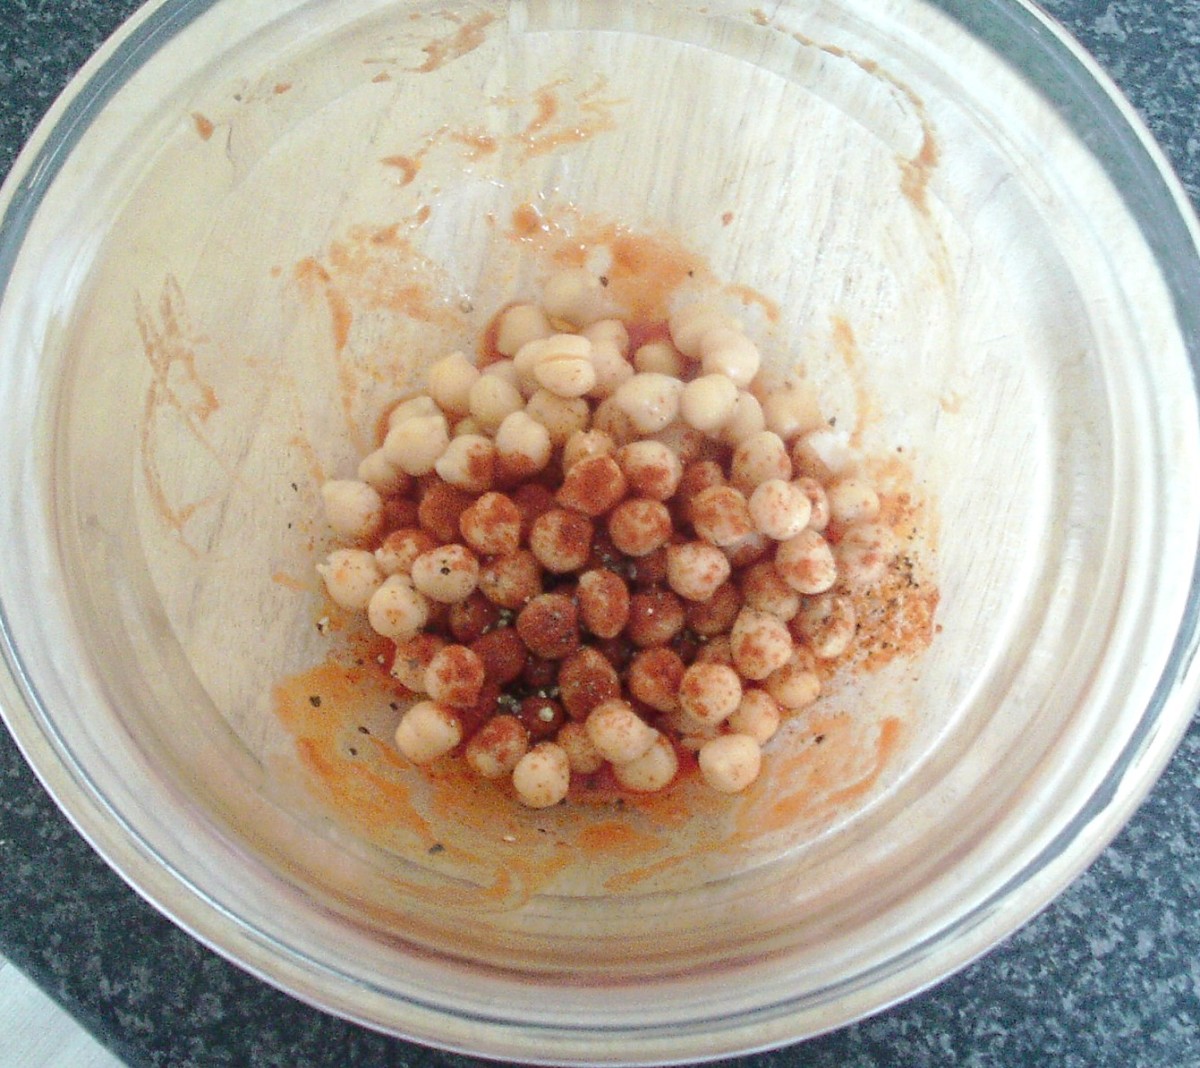 Chickpeas are seasoned and stirred in to tomato sauce